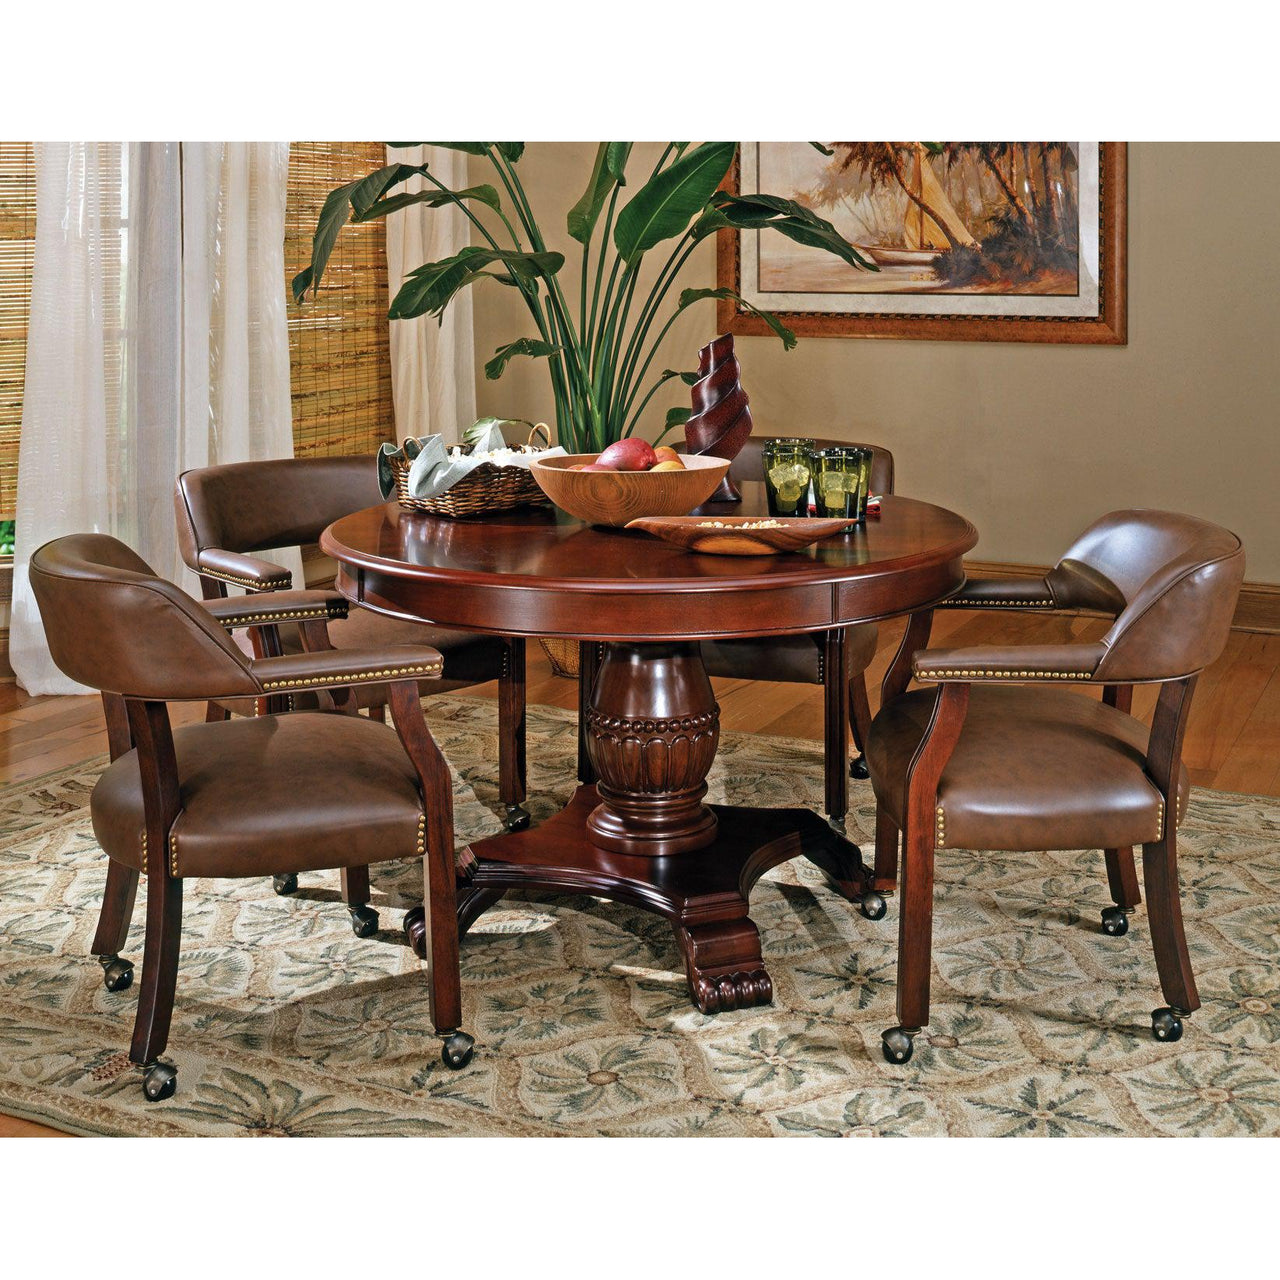 Convertible Poker Table Set Tournament in Brown with matching Chairs-AMERICANA-POKER-TABLES